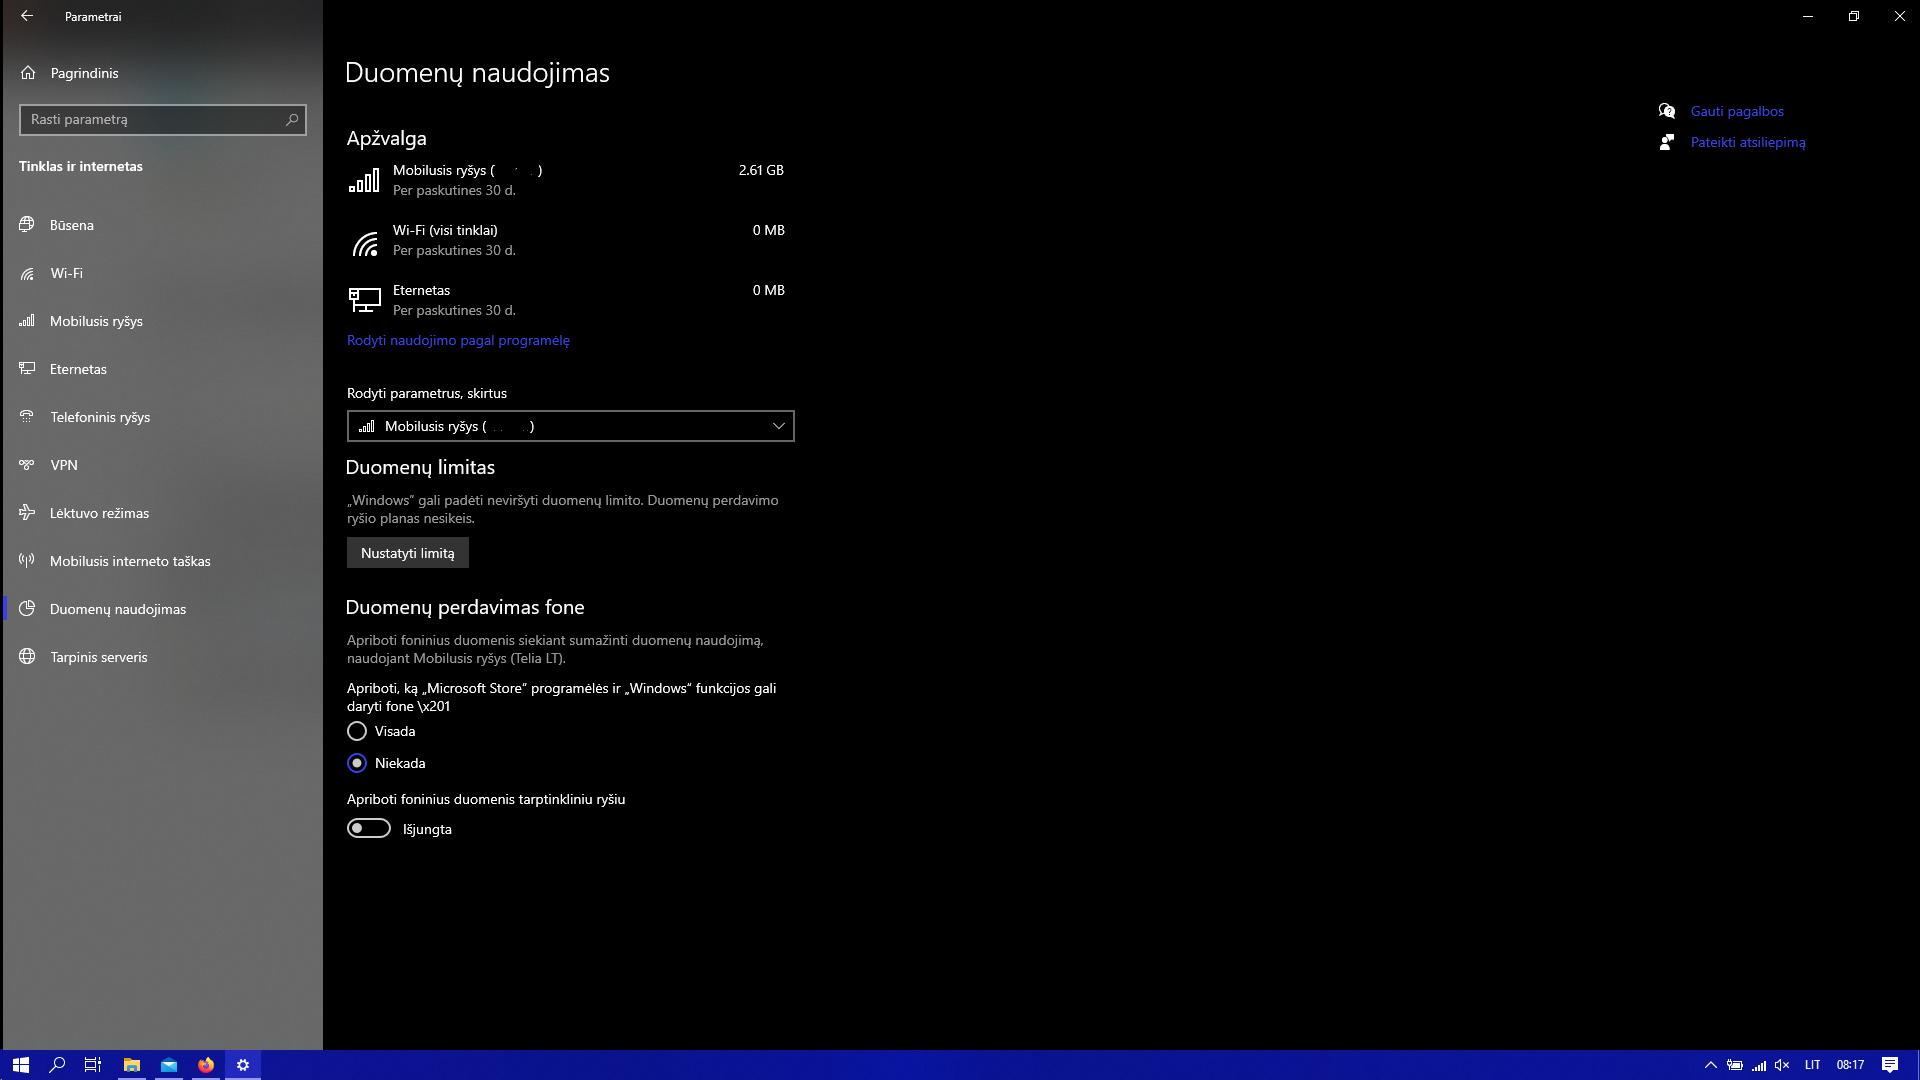 Windows 10 media feature pack won't download on mobile internet despite turning off the... 0c510500-aad8-480a-a55f-ccbcdba136eb?upload=true.png